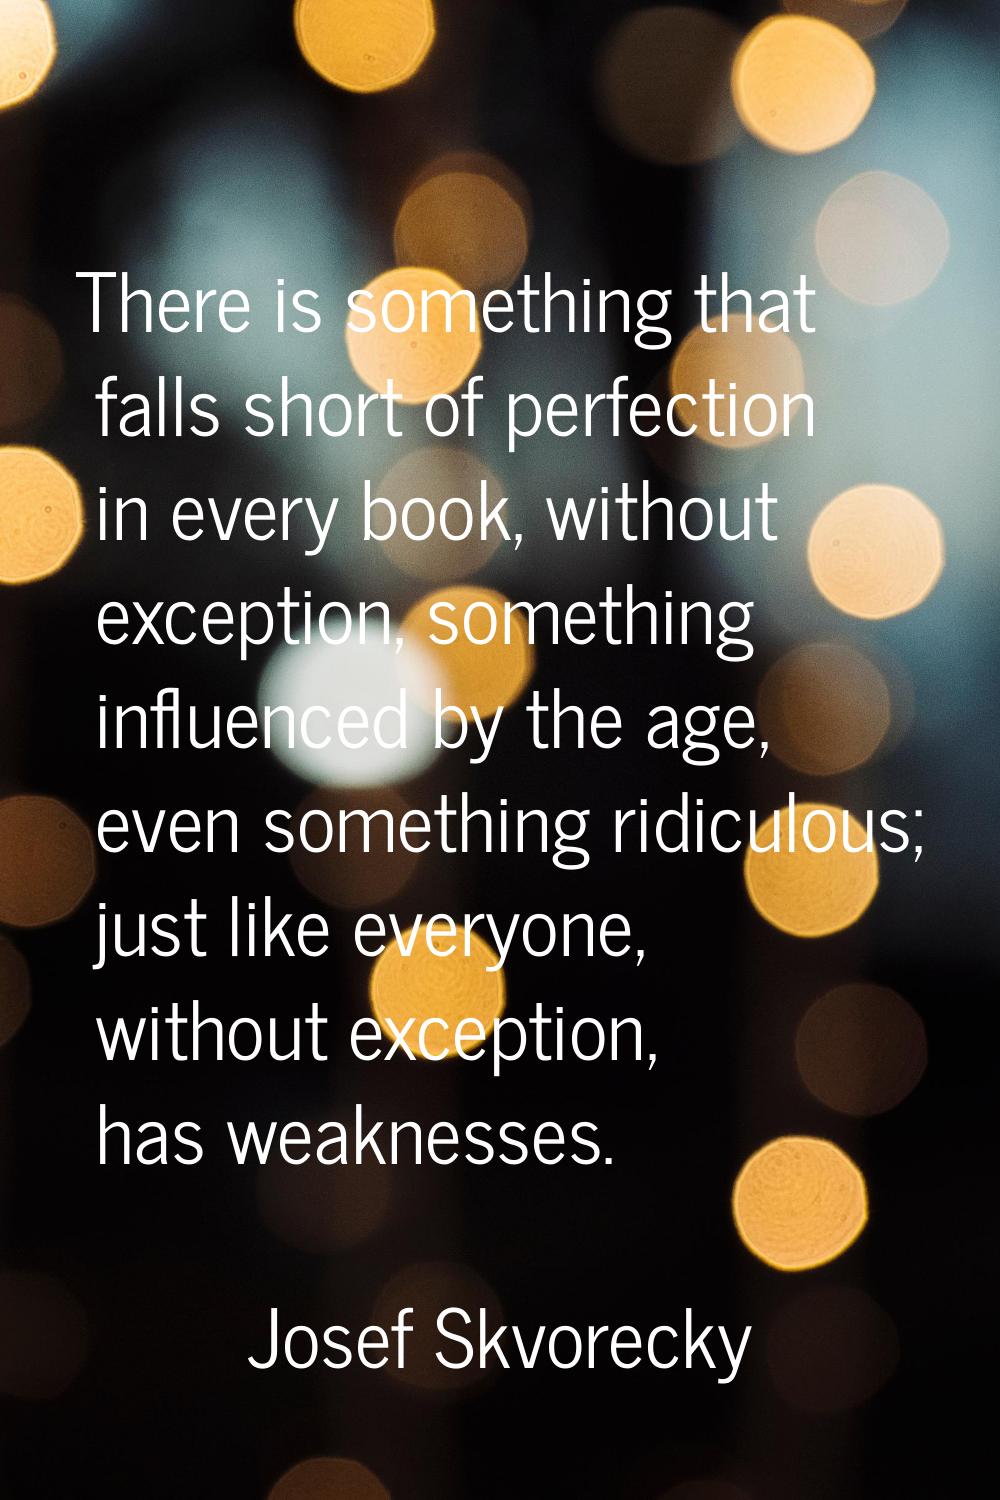 There is something that falls short of perfection in every book, without exception, something influ